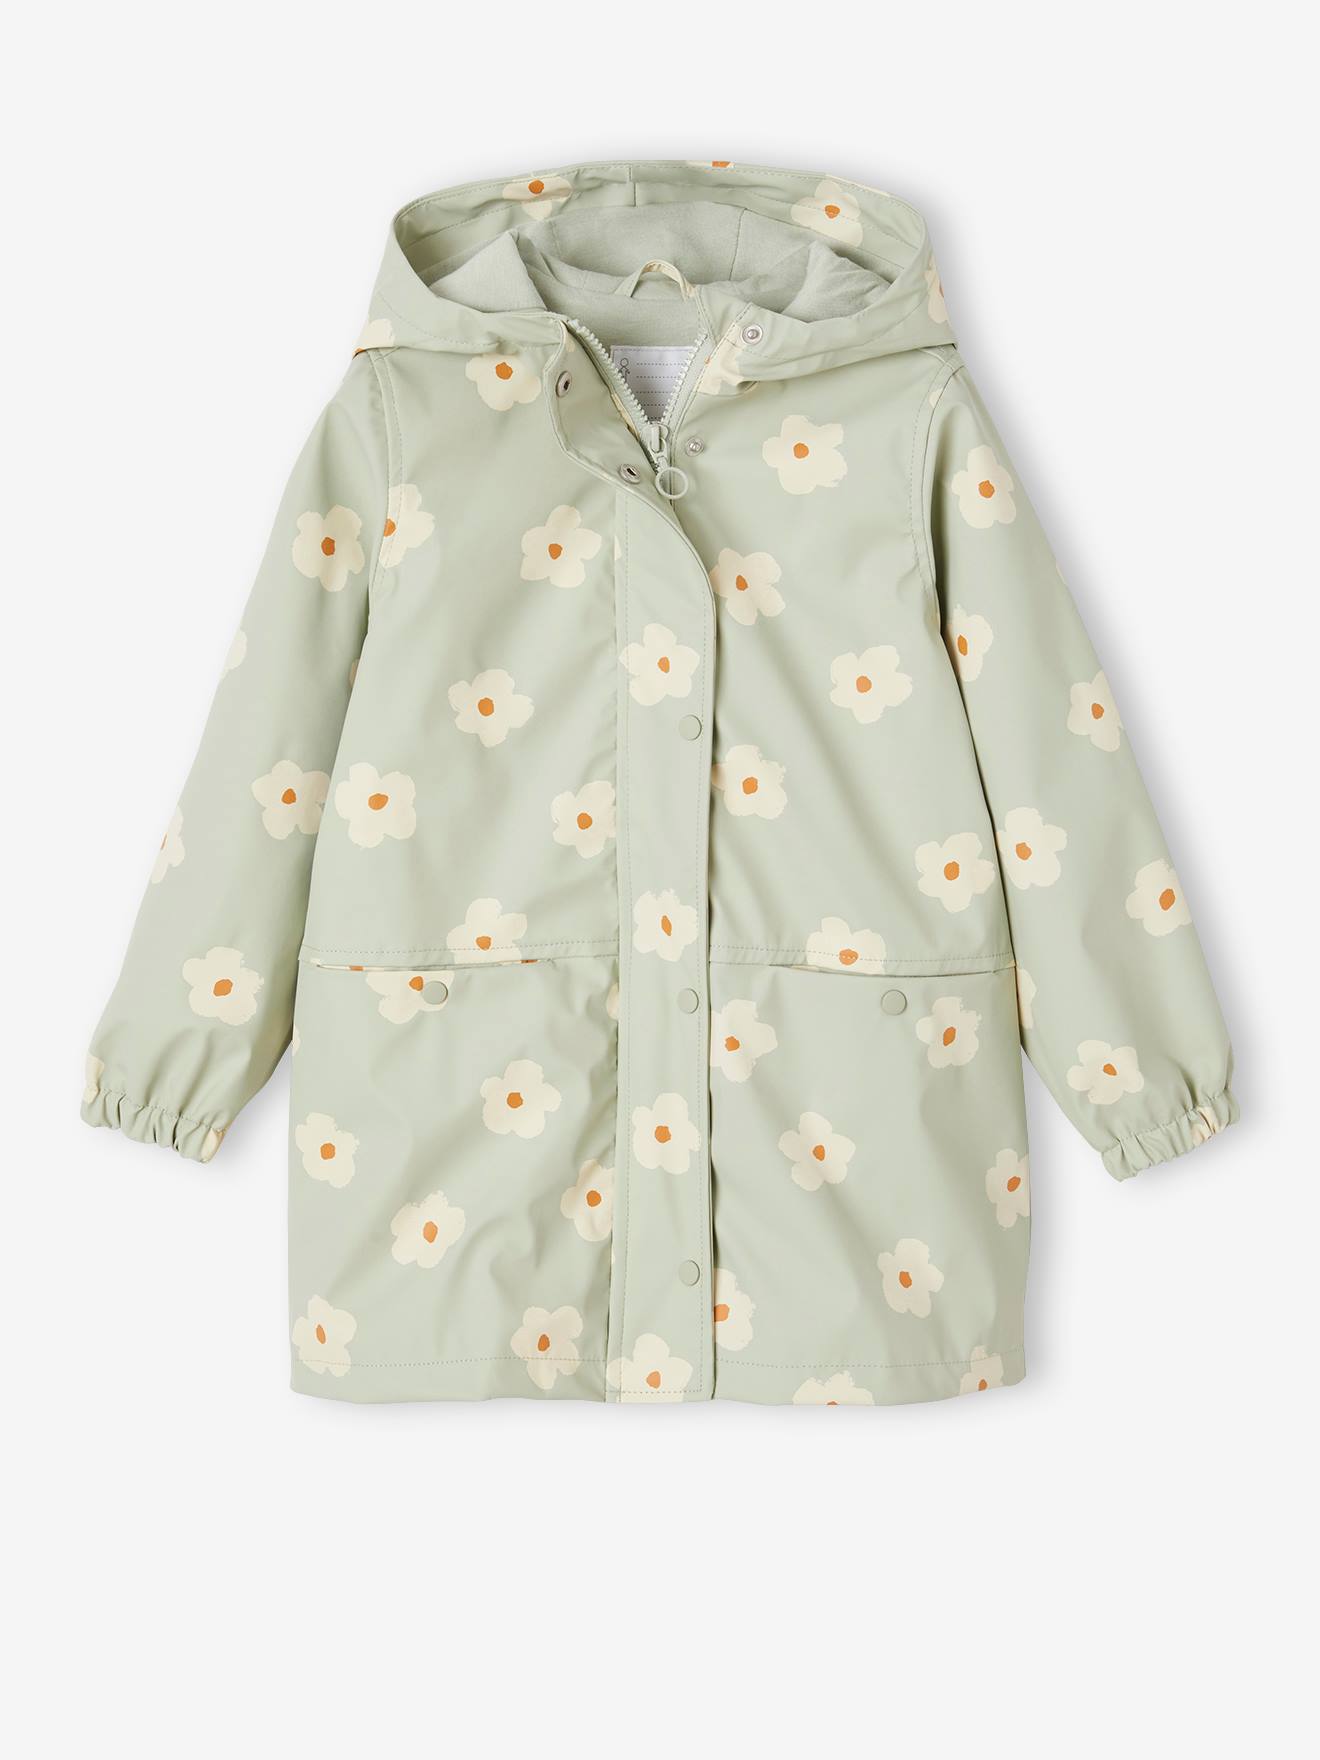 Floral Raincoat with Hood, for Girls sage green